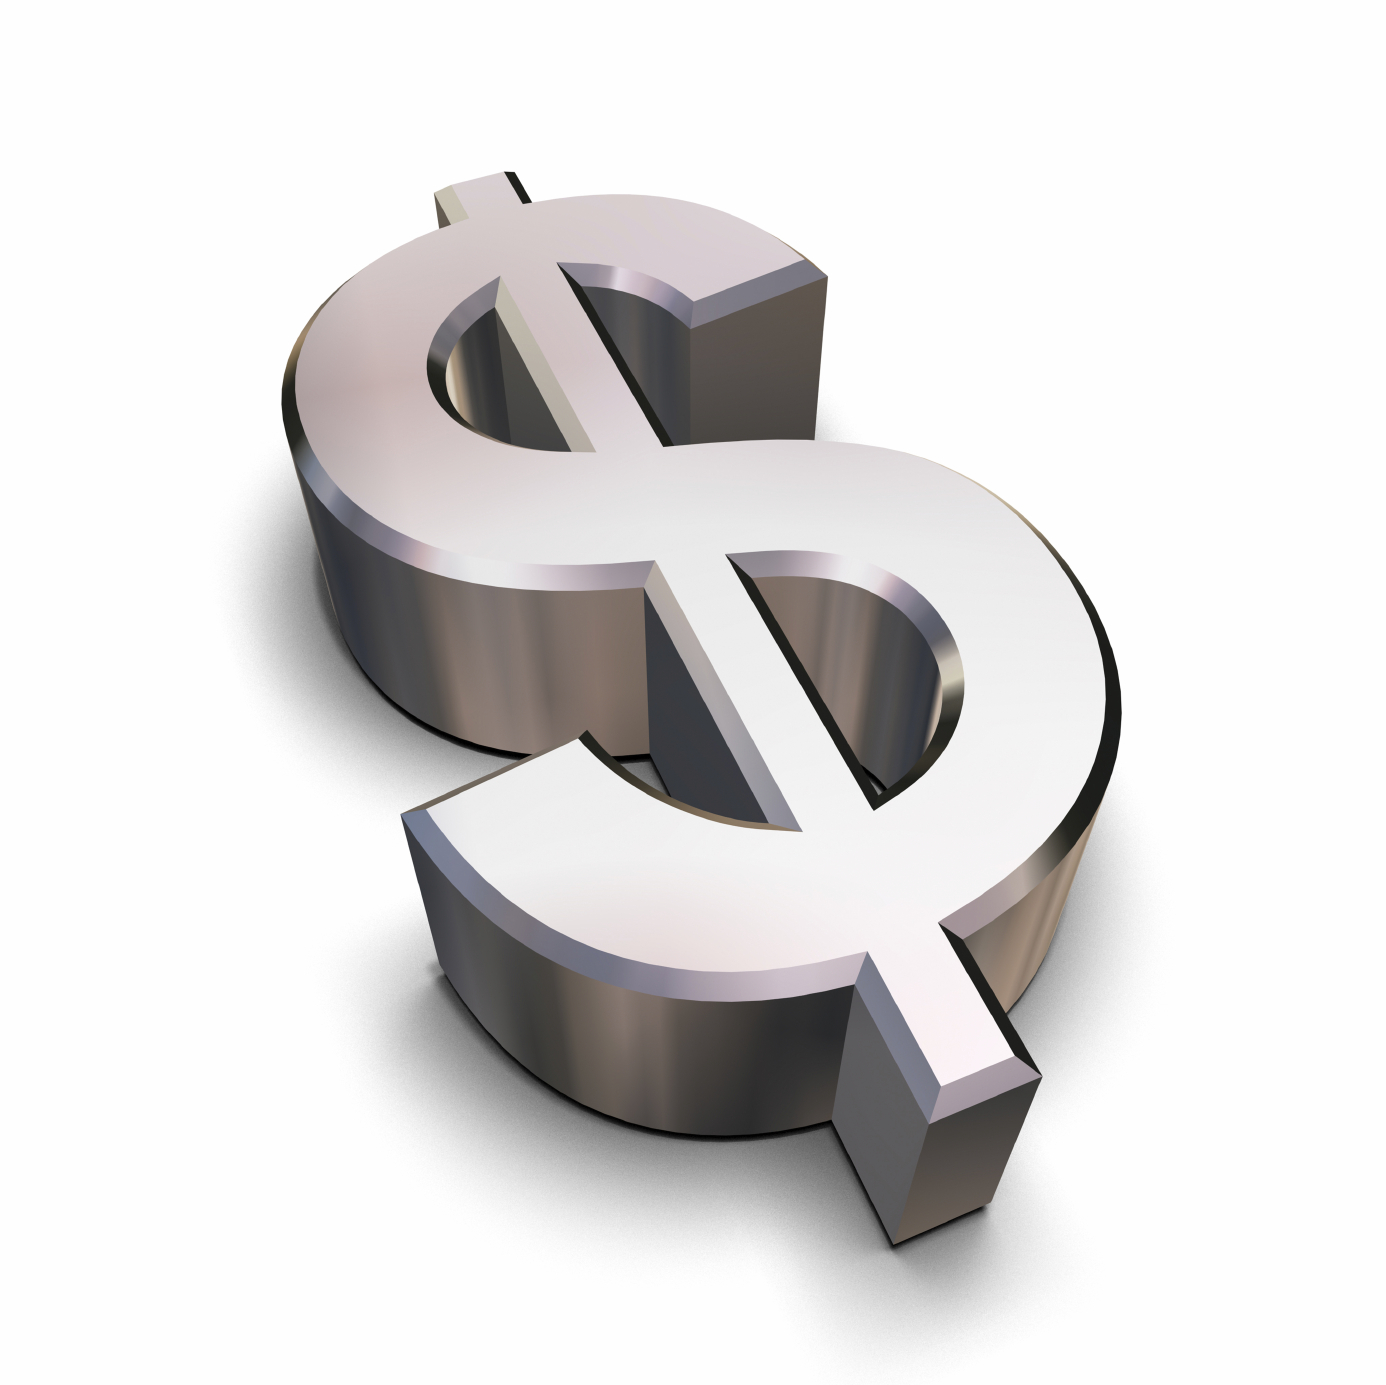 Dollar Sign - Dollars Signs Images and Backgrounds